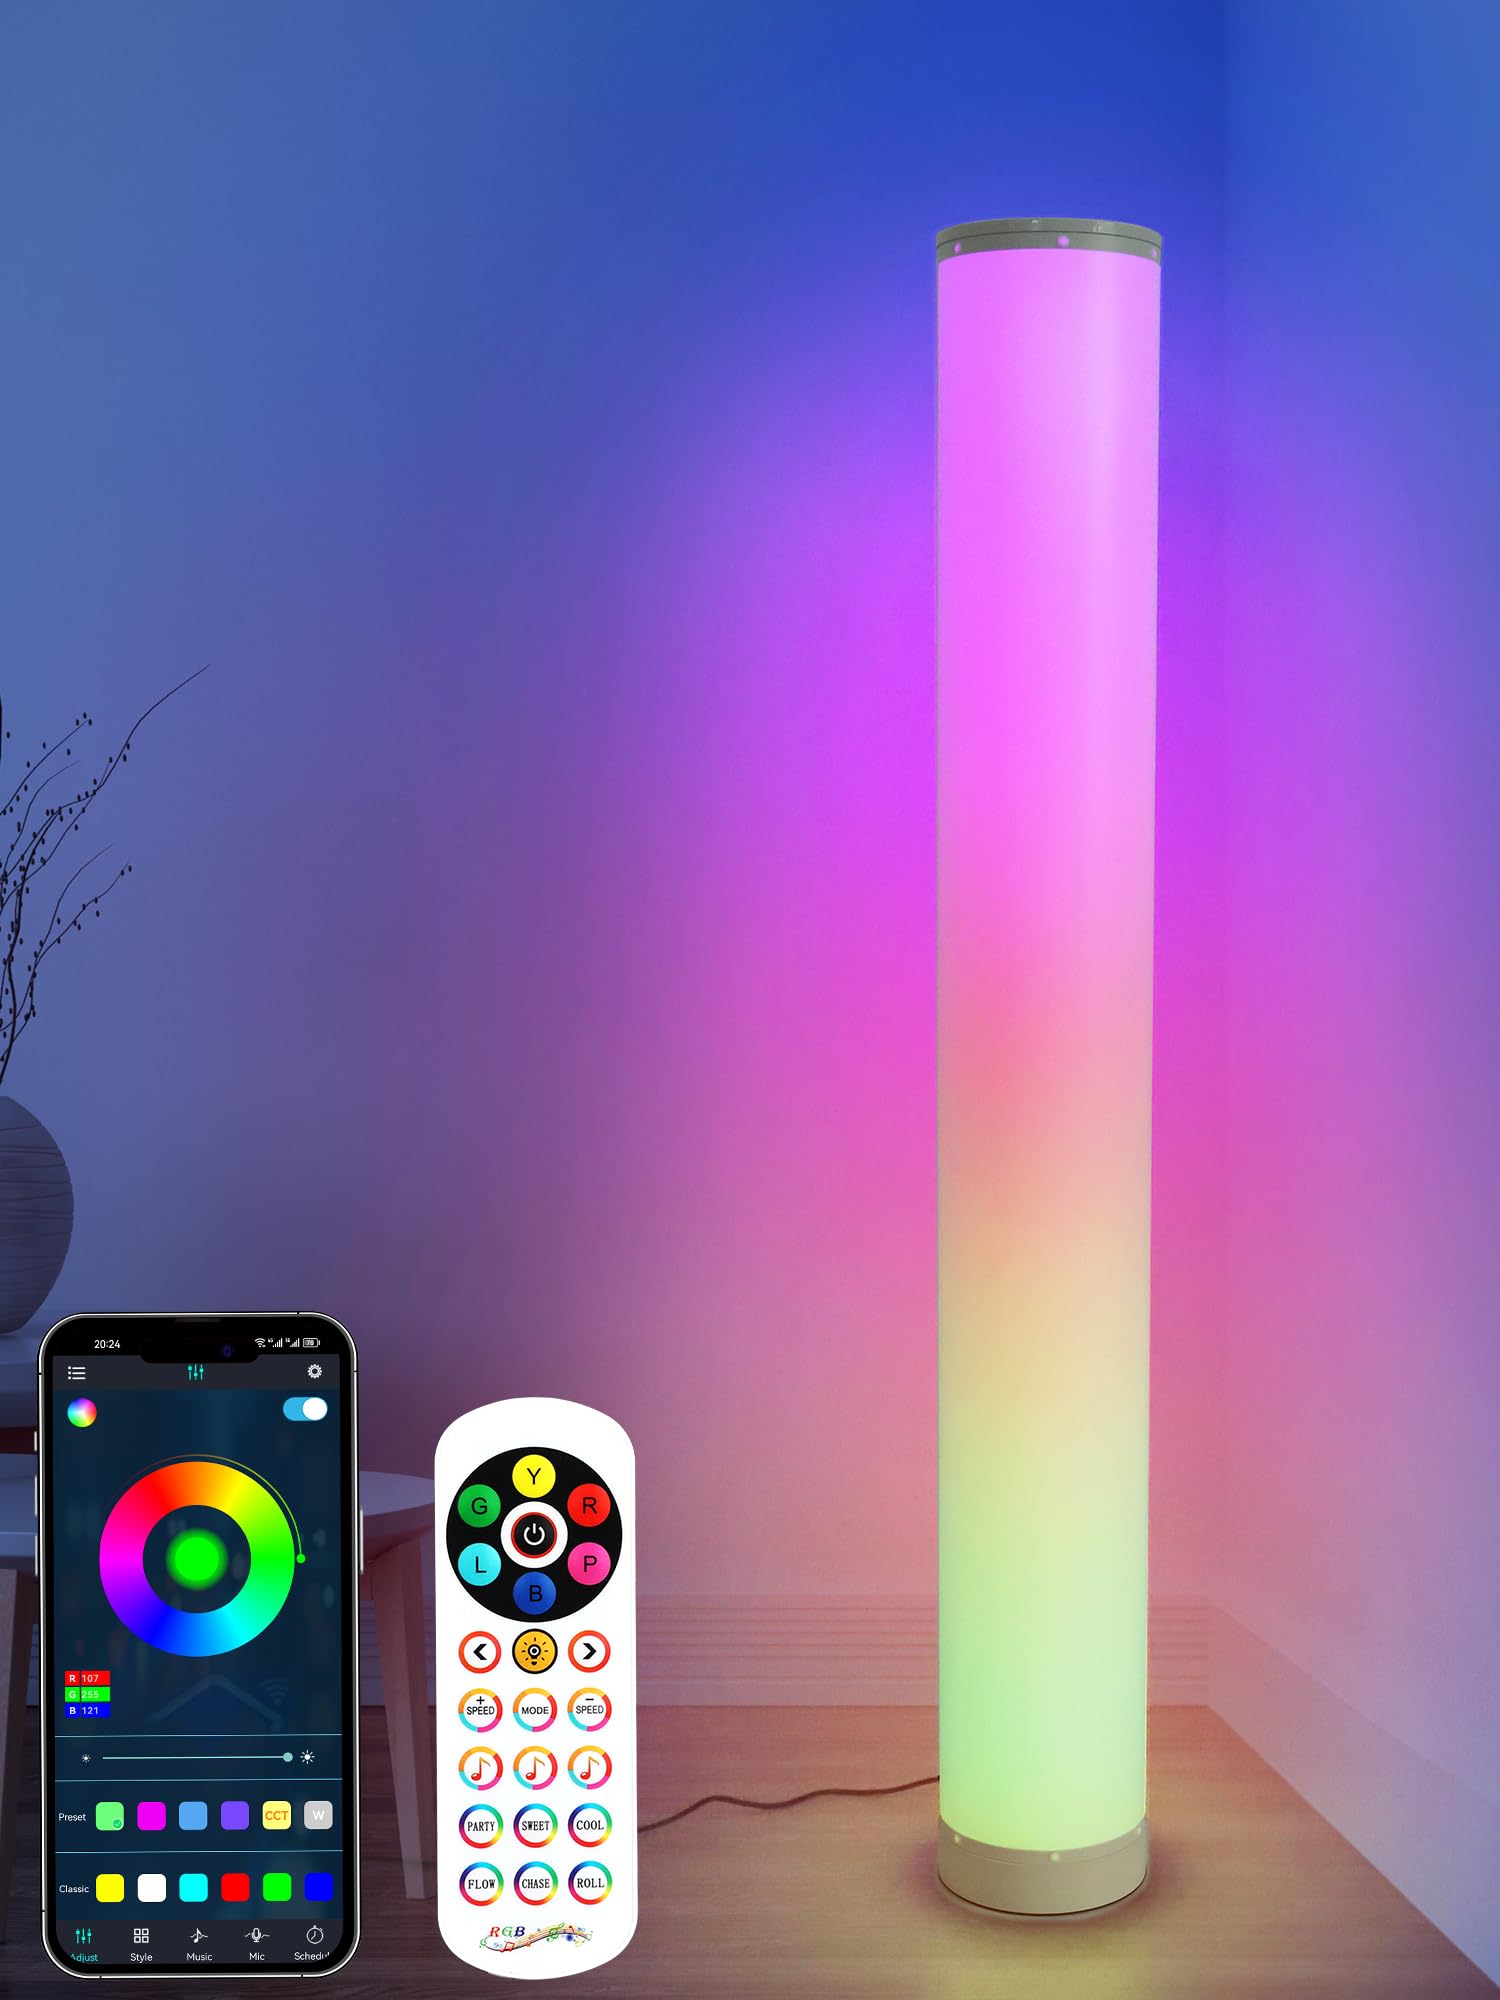 BrizLabs Smart Christmas Floor Lamp, Color Changing LED Lamp with Bluetooth APP & Remote, Dimmable Xmas Corner Mood Standing Flo